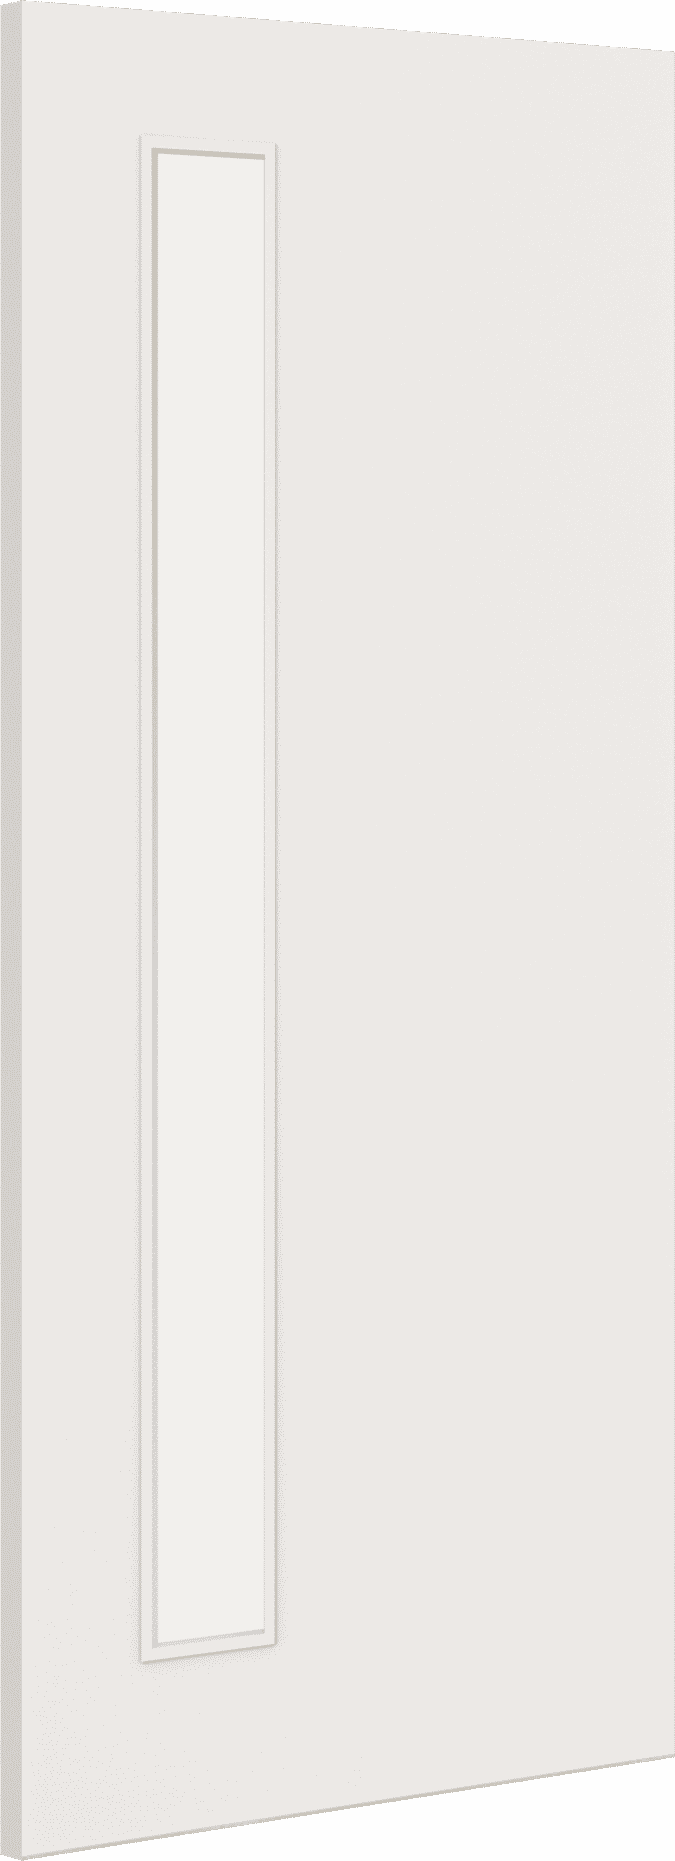 2040mm x 626mm x 44mm Architectural Paint Grade White 06 Frosted Glazed Fire Door Blank